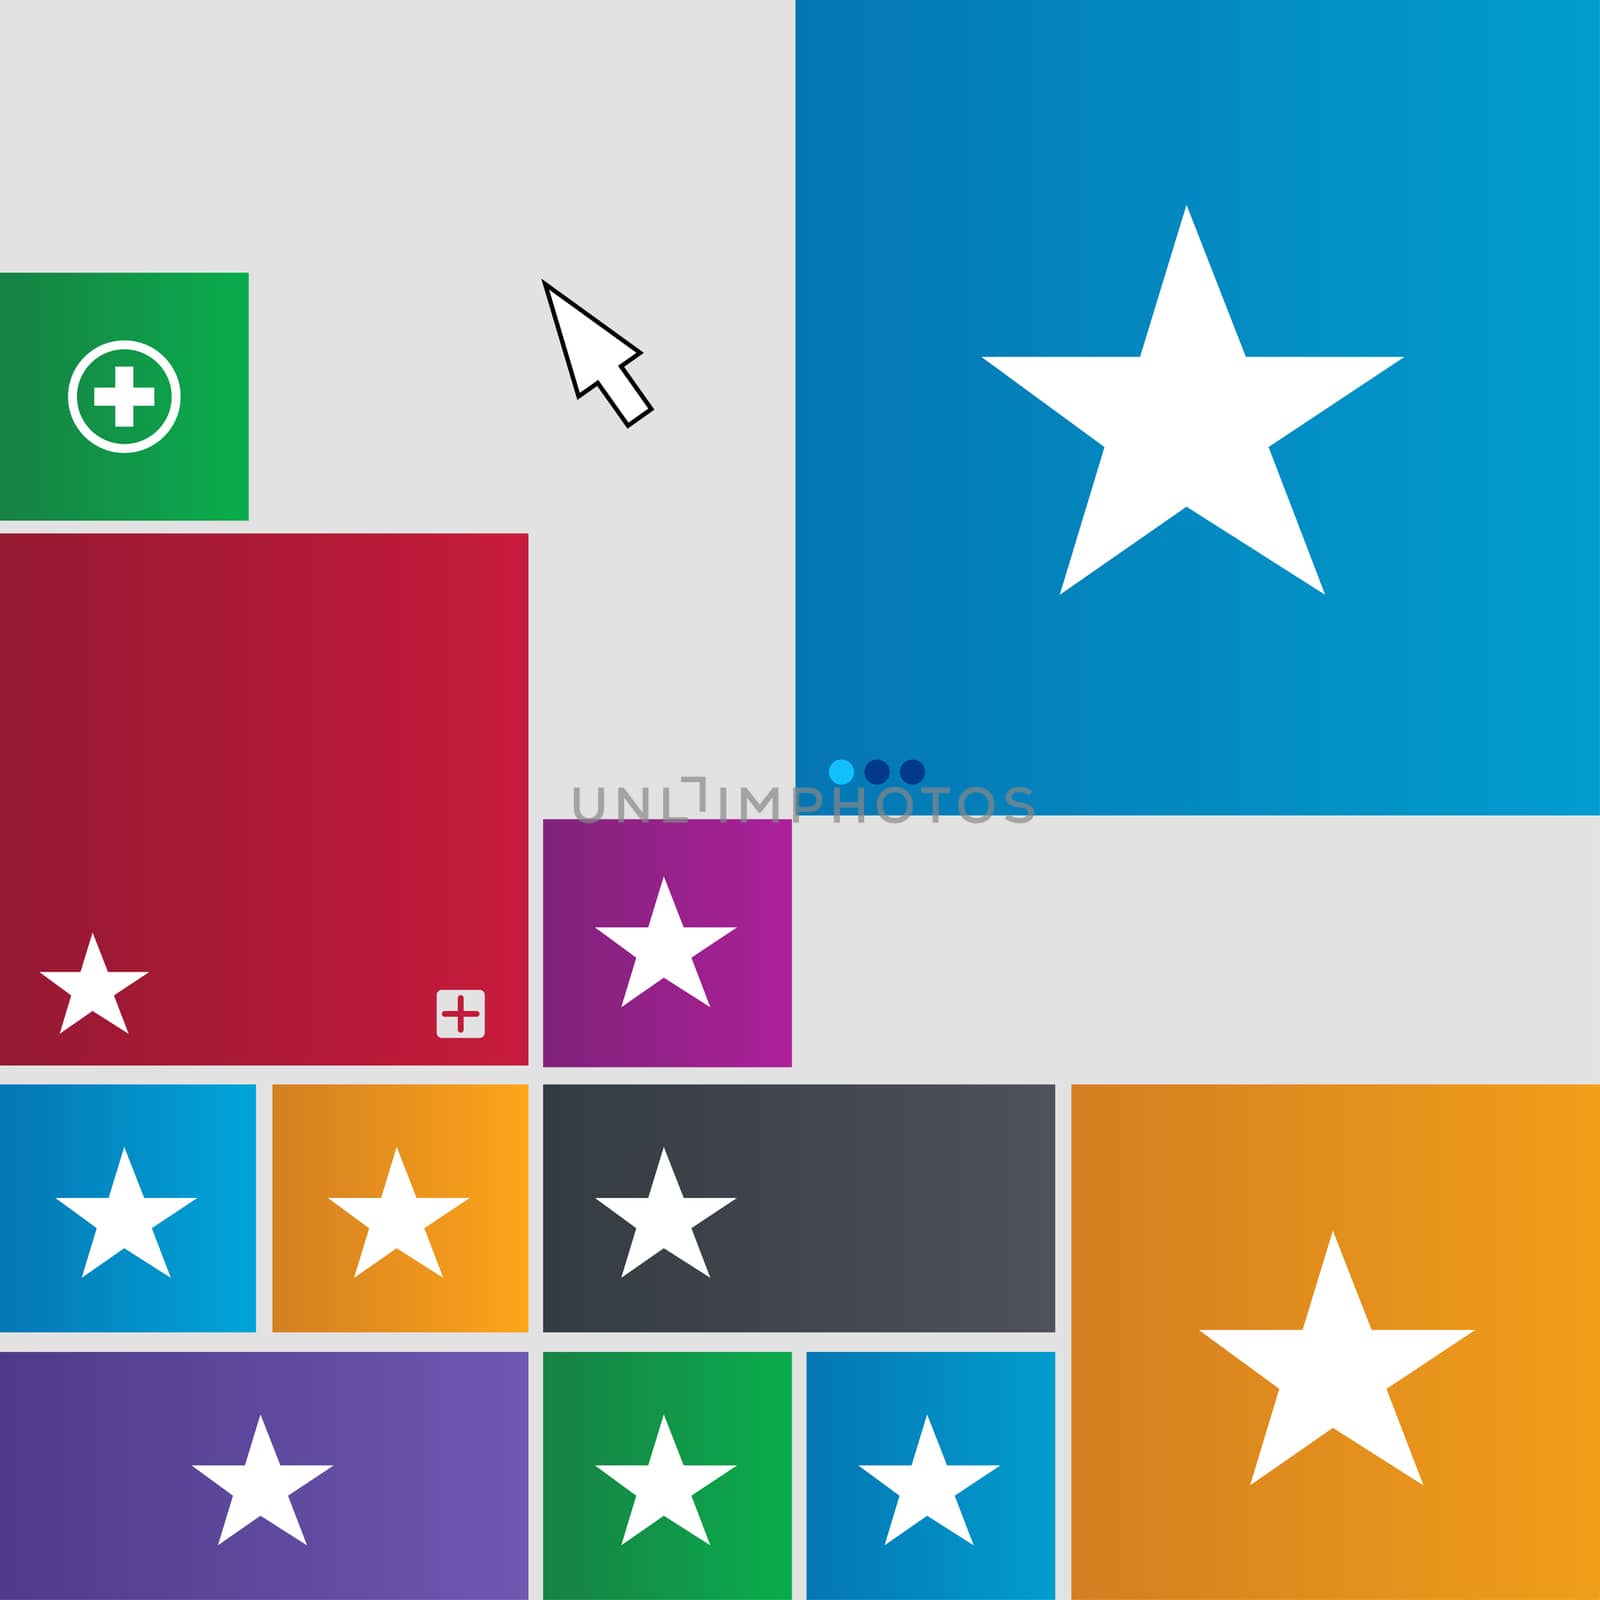 Star, Favorite Star, Favorite icon sign. Metro style buttons. Modern interface website buttons with cursor pointer. illustration